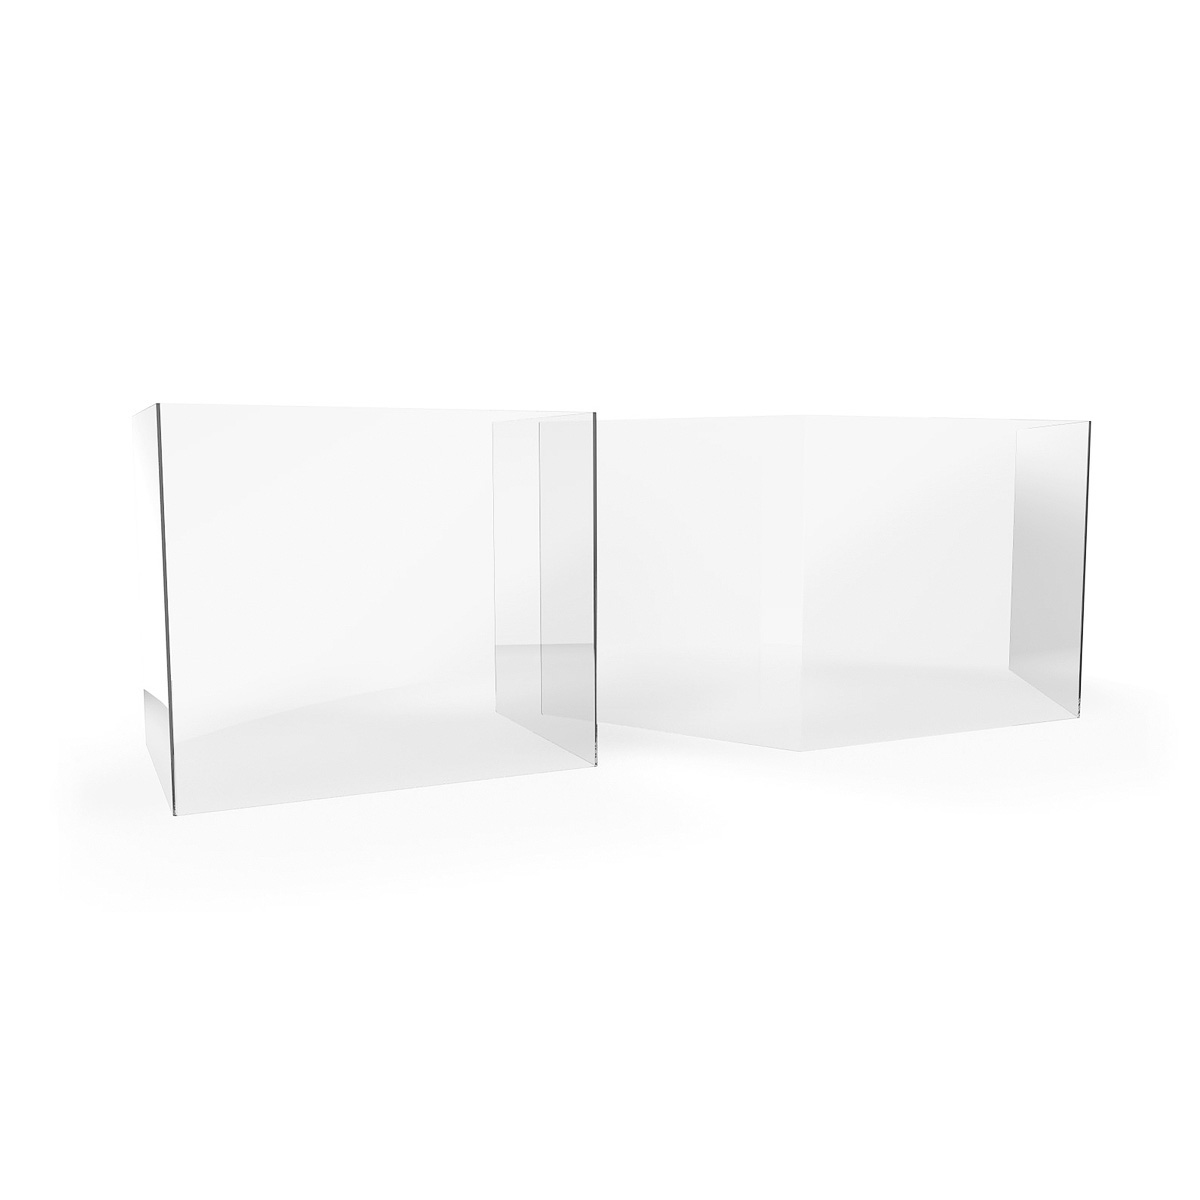 ACHOO® Perspex Screens Have Optional Service Hatch Cut Outs For Contact Free Transactions